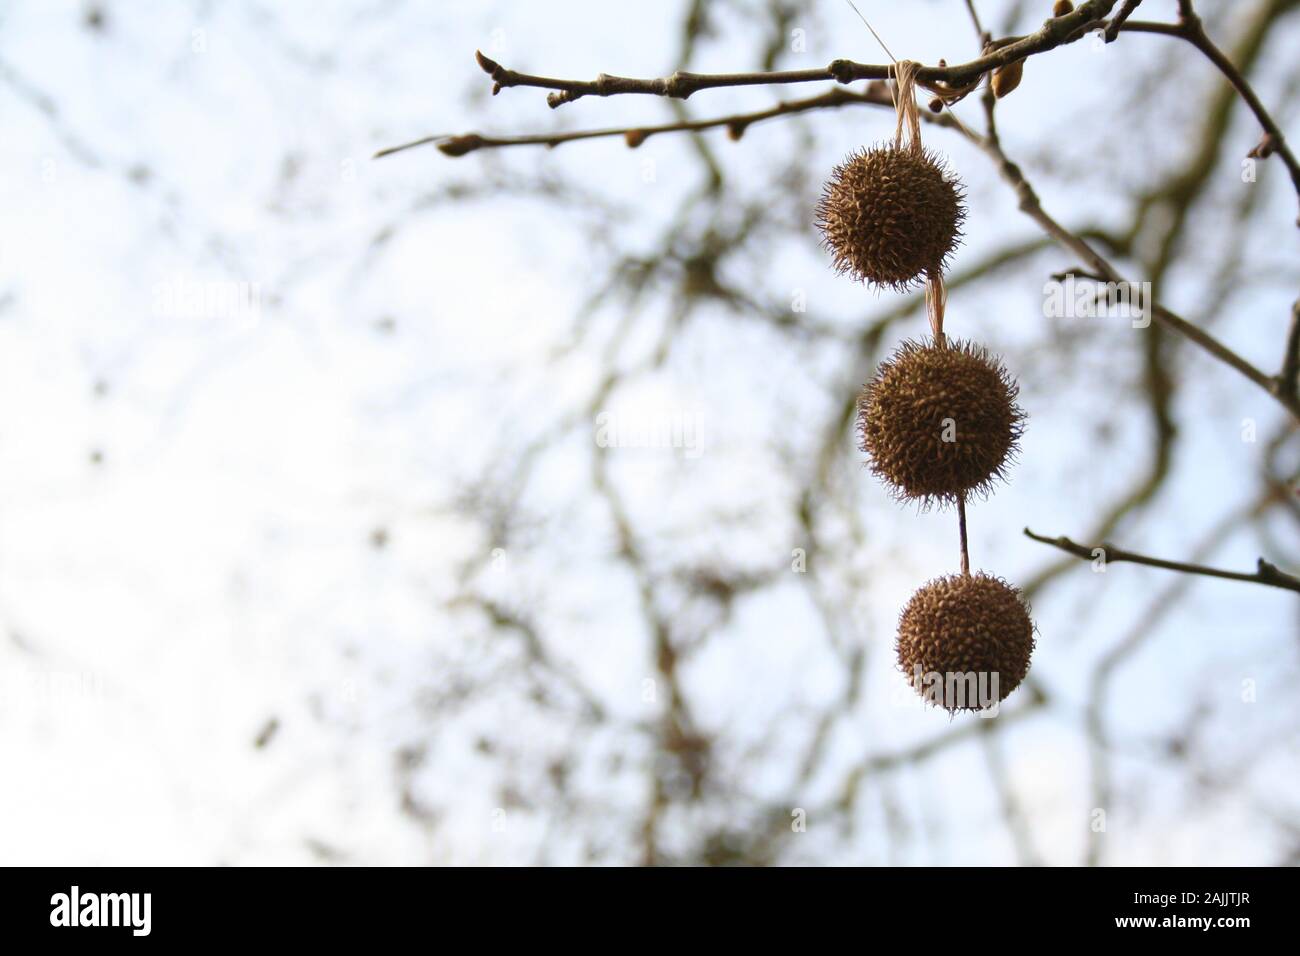 Round Ball Shaped Spiky Seed Heads Of The American Sycamore Platanus